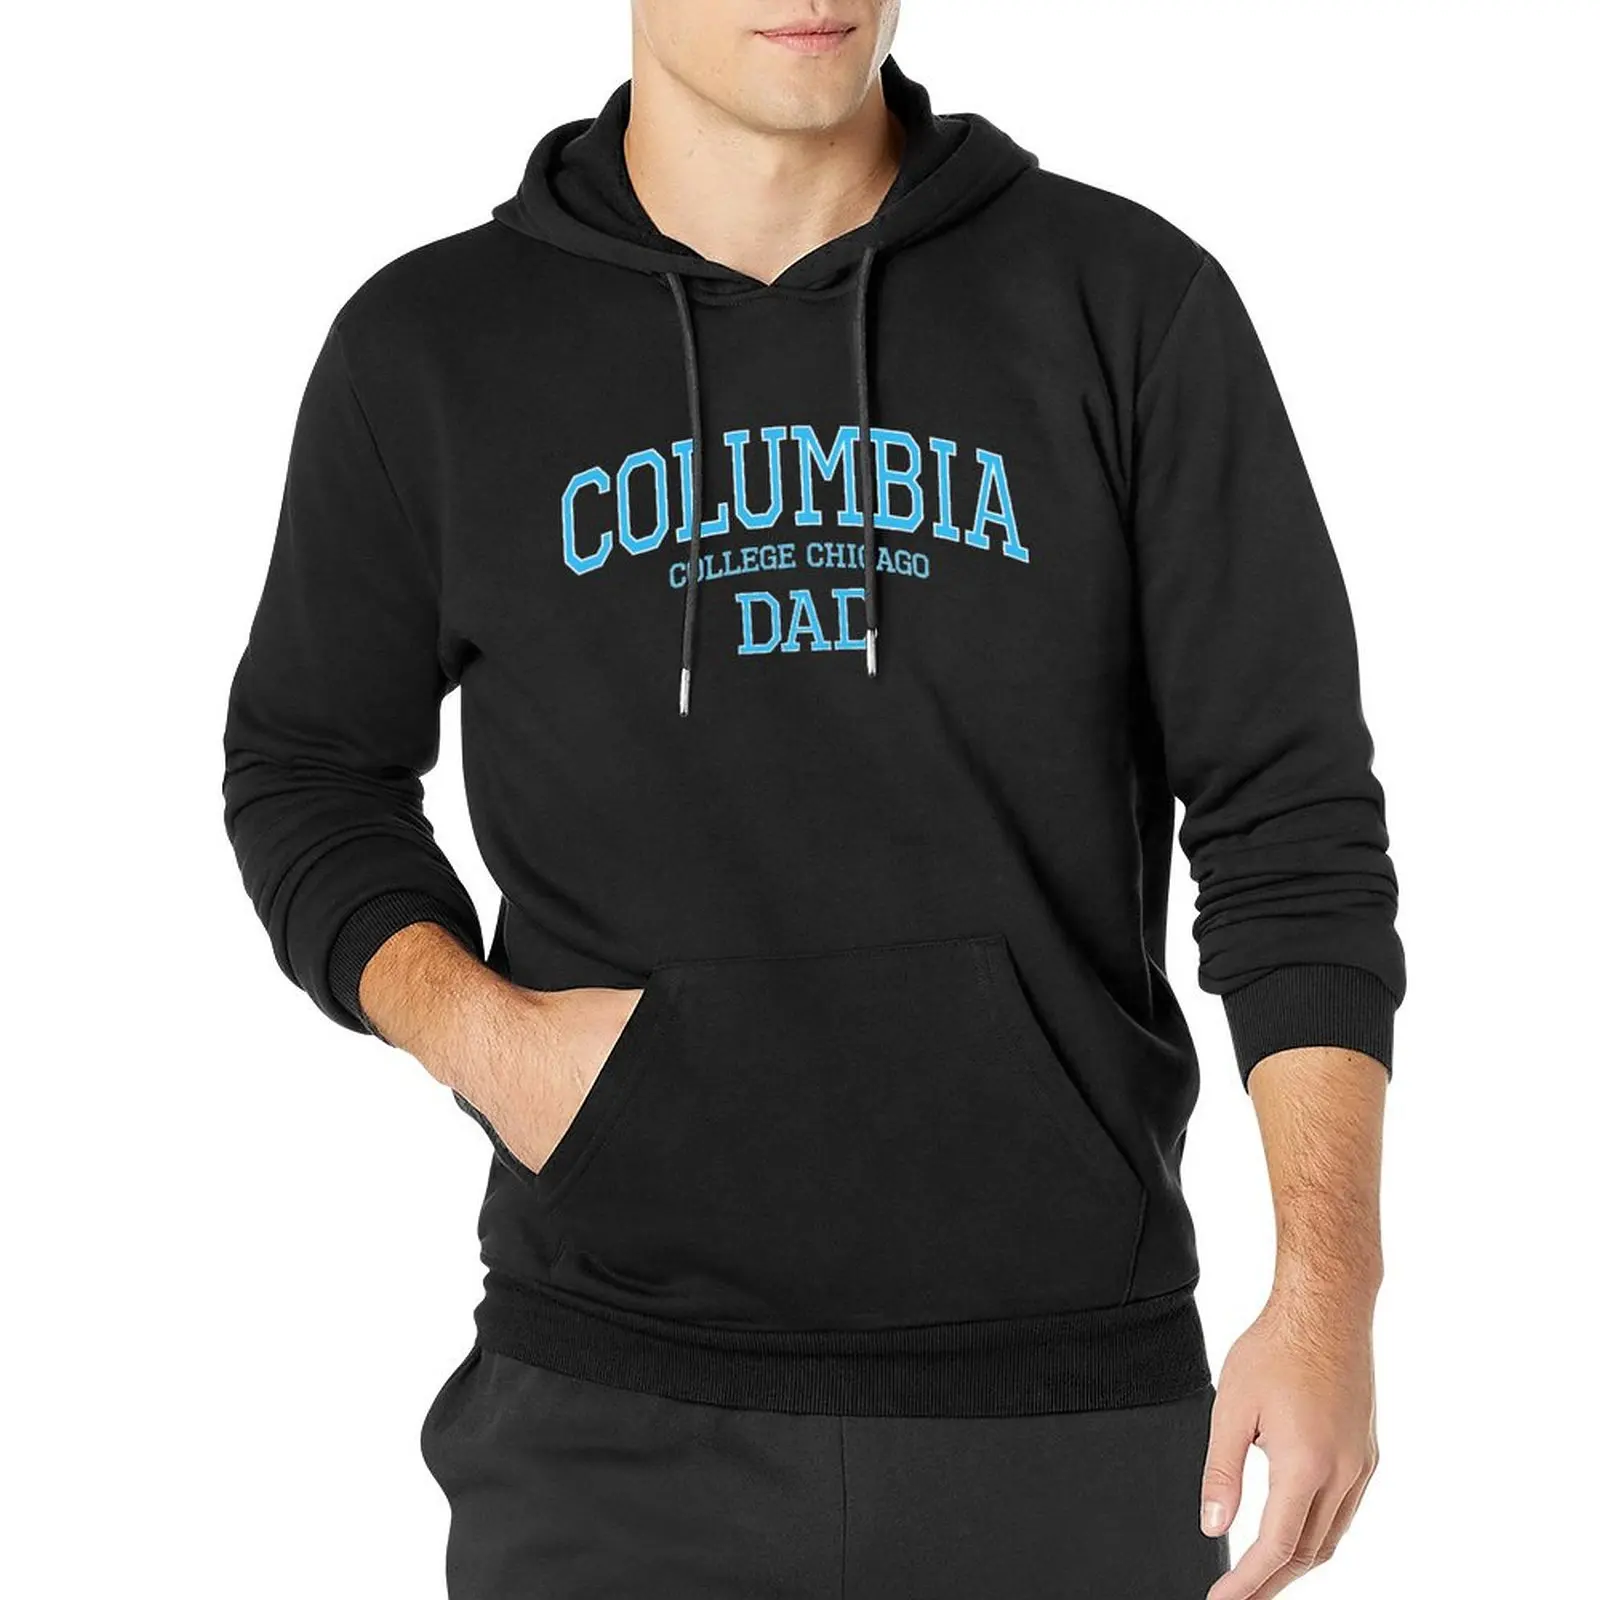 

Columbia College Chicago Dad Casual Hoodies Blue Letter Print Y2k Cool Cotton Sweatshirts Outerwear Oversized Pullover Hoodie